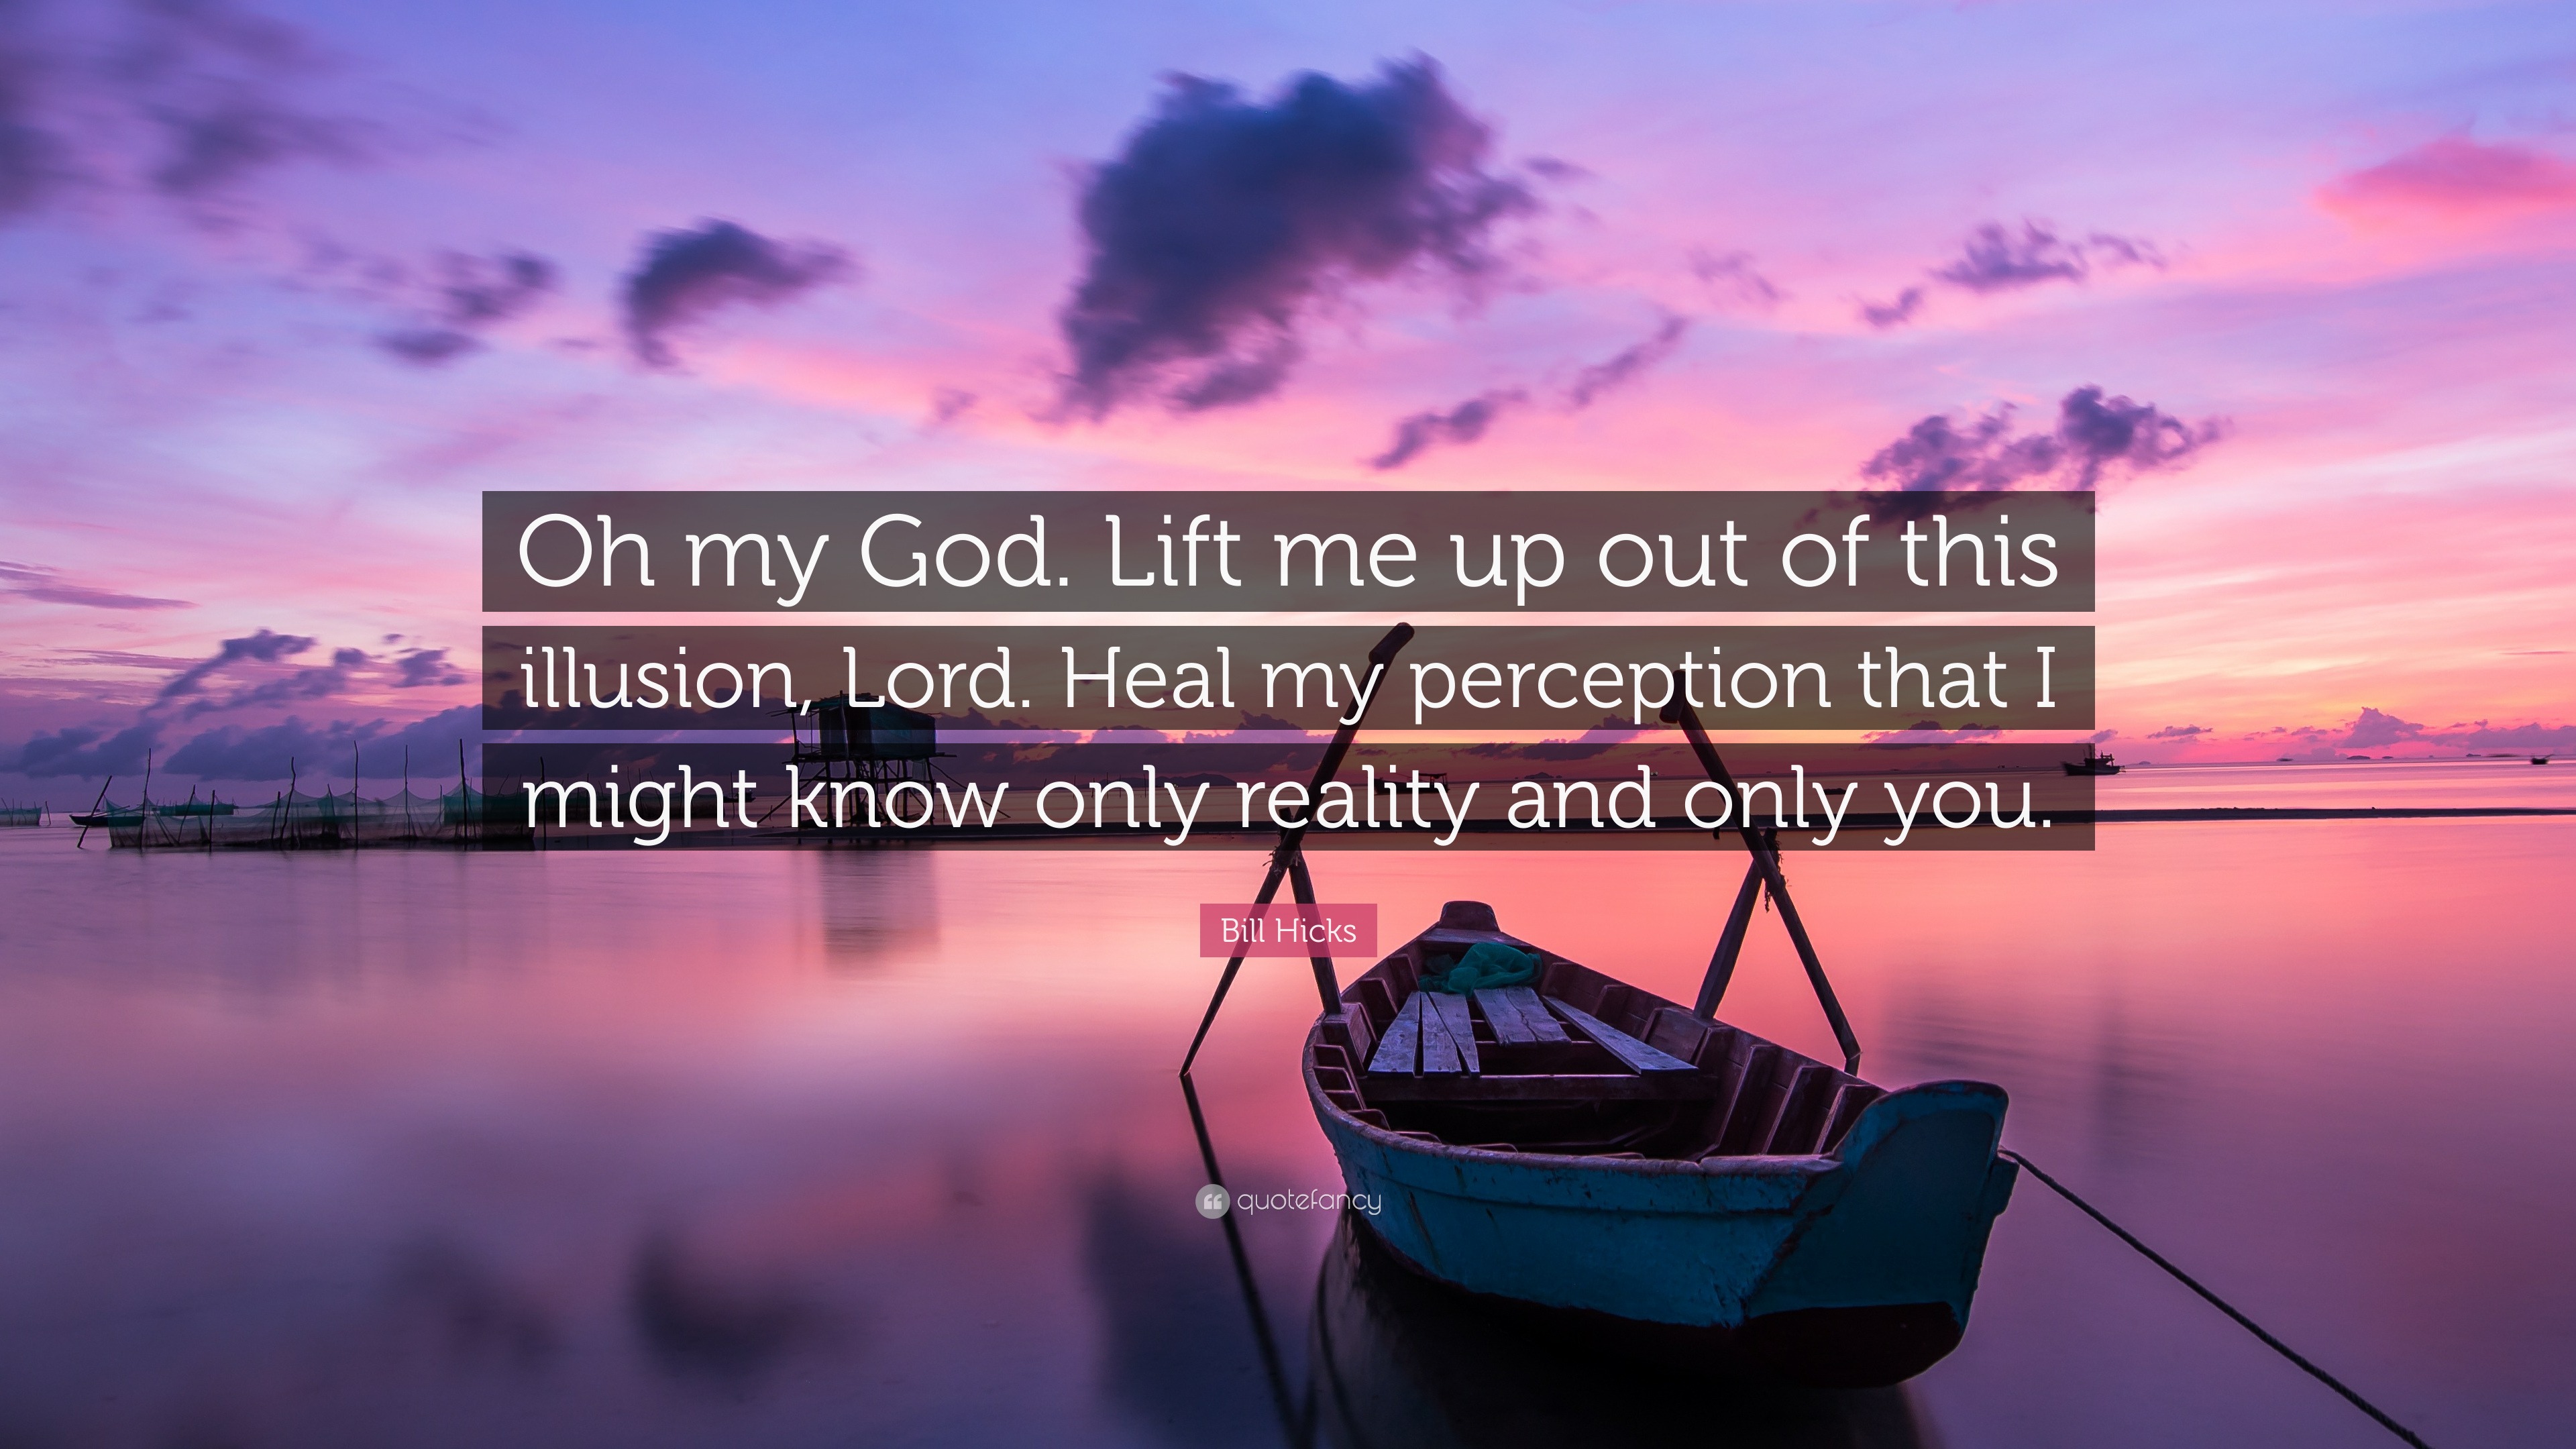 Bill Hicks Quote: “Oh my God. Lift me up out of this illusion, Lord. Heal my